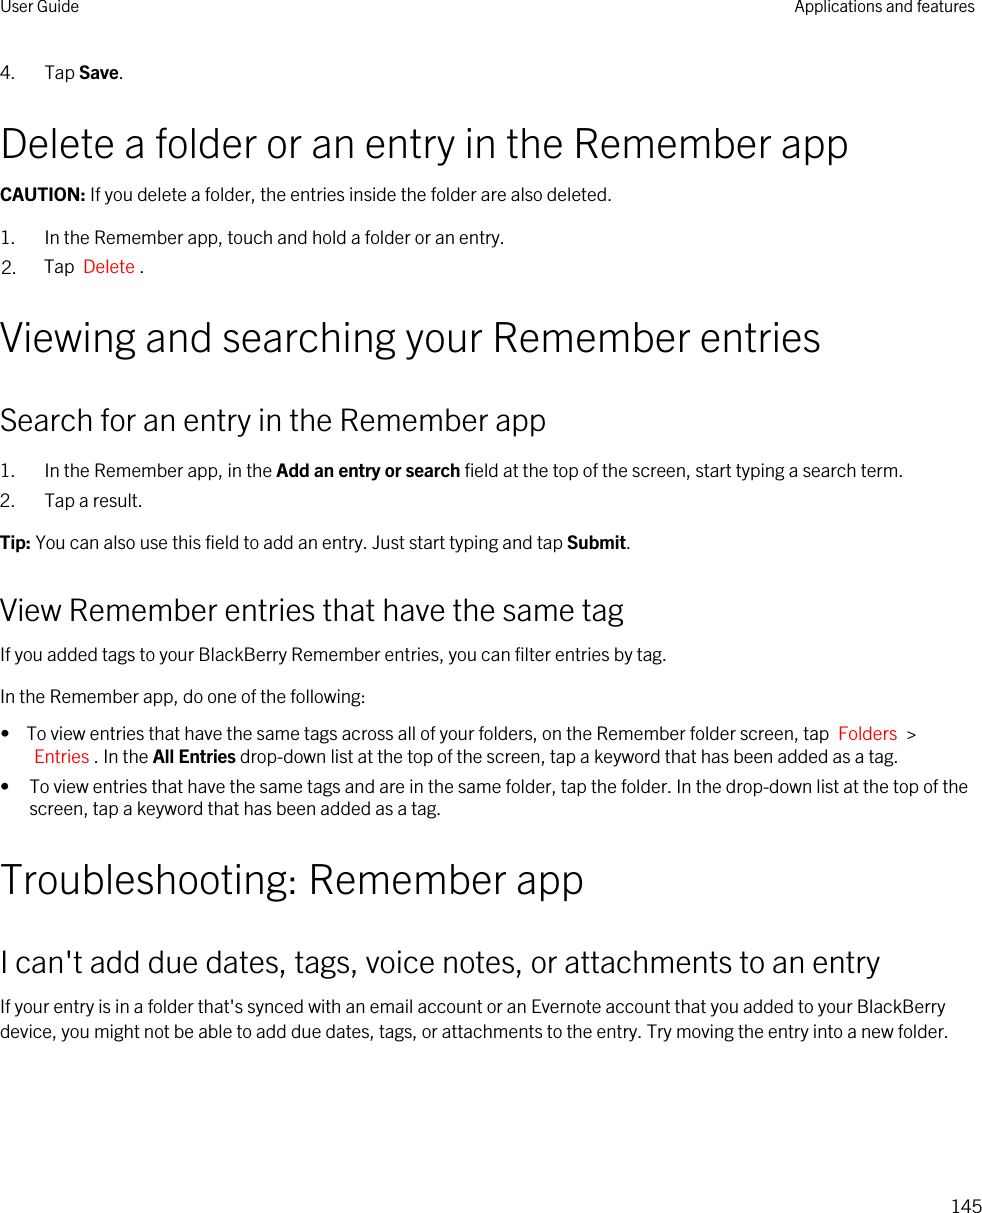 4. Tap Save.Delete a folder or an entry in the Remember appCAUTION: If you delete a folder, the entries inside the folder are also deleted.1. In the Remember app, touch and hold a folder or an entry.2. Tap  Delete .Viewing and searching your Remember entriesSearch for an entry in the Remember app1. In the Remember app, in the Add an entry or search field at the top of the screen, start typing a search term.2. Tap a result.Tip: You can also use this field to add an entry. Just start typing and tap Submit.View Remember entries that have the same tagIf you added tags to your BlackBerry Remember entries, you can filter entries by tag.In the Remember app, do one of the following:•  To view entries that have the same tags across all of your folders, on the Remember folder screen, tap  Folders  &gt; Entries . In the All Entries drop-down list at the top of the screen, tap a keyword that has been added as a tag.• To view entries that have the same tags and are in the same folder, tap the folder. In the drop-down list at the top of the screen, tap a keyword that has been added as a tag.Troubleshooting: Remember appI can&apos;t add due dates, tags, voice notes, or attachments to an entryIf your entry is in a folder that&apos;s synced with an email account or an Evernote account that you added to your BlackBerry device, you might not be able to add due dates, tags, or attachments to the entry. Try moving the entry into a new folder.User Guide Applications and features145